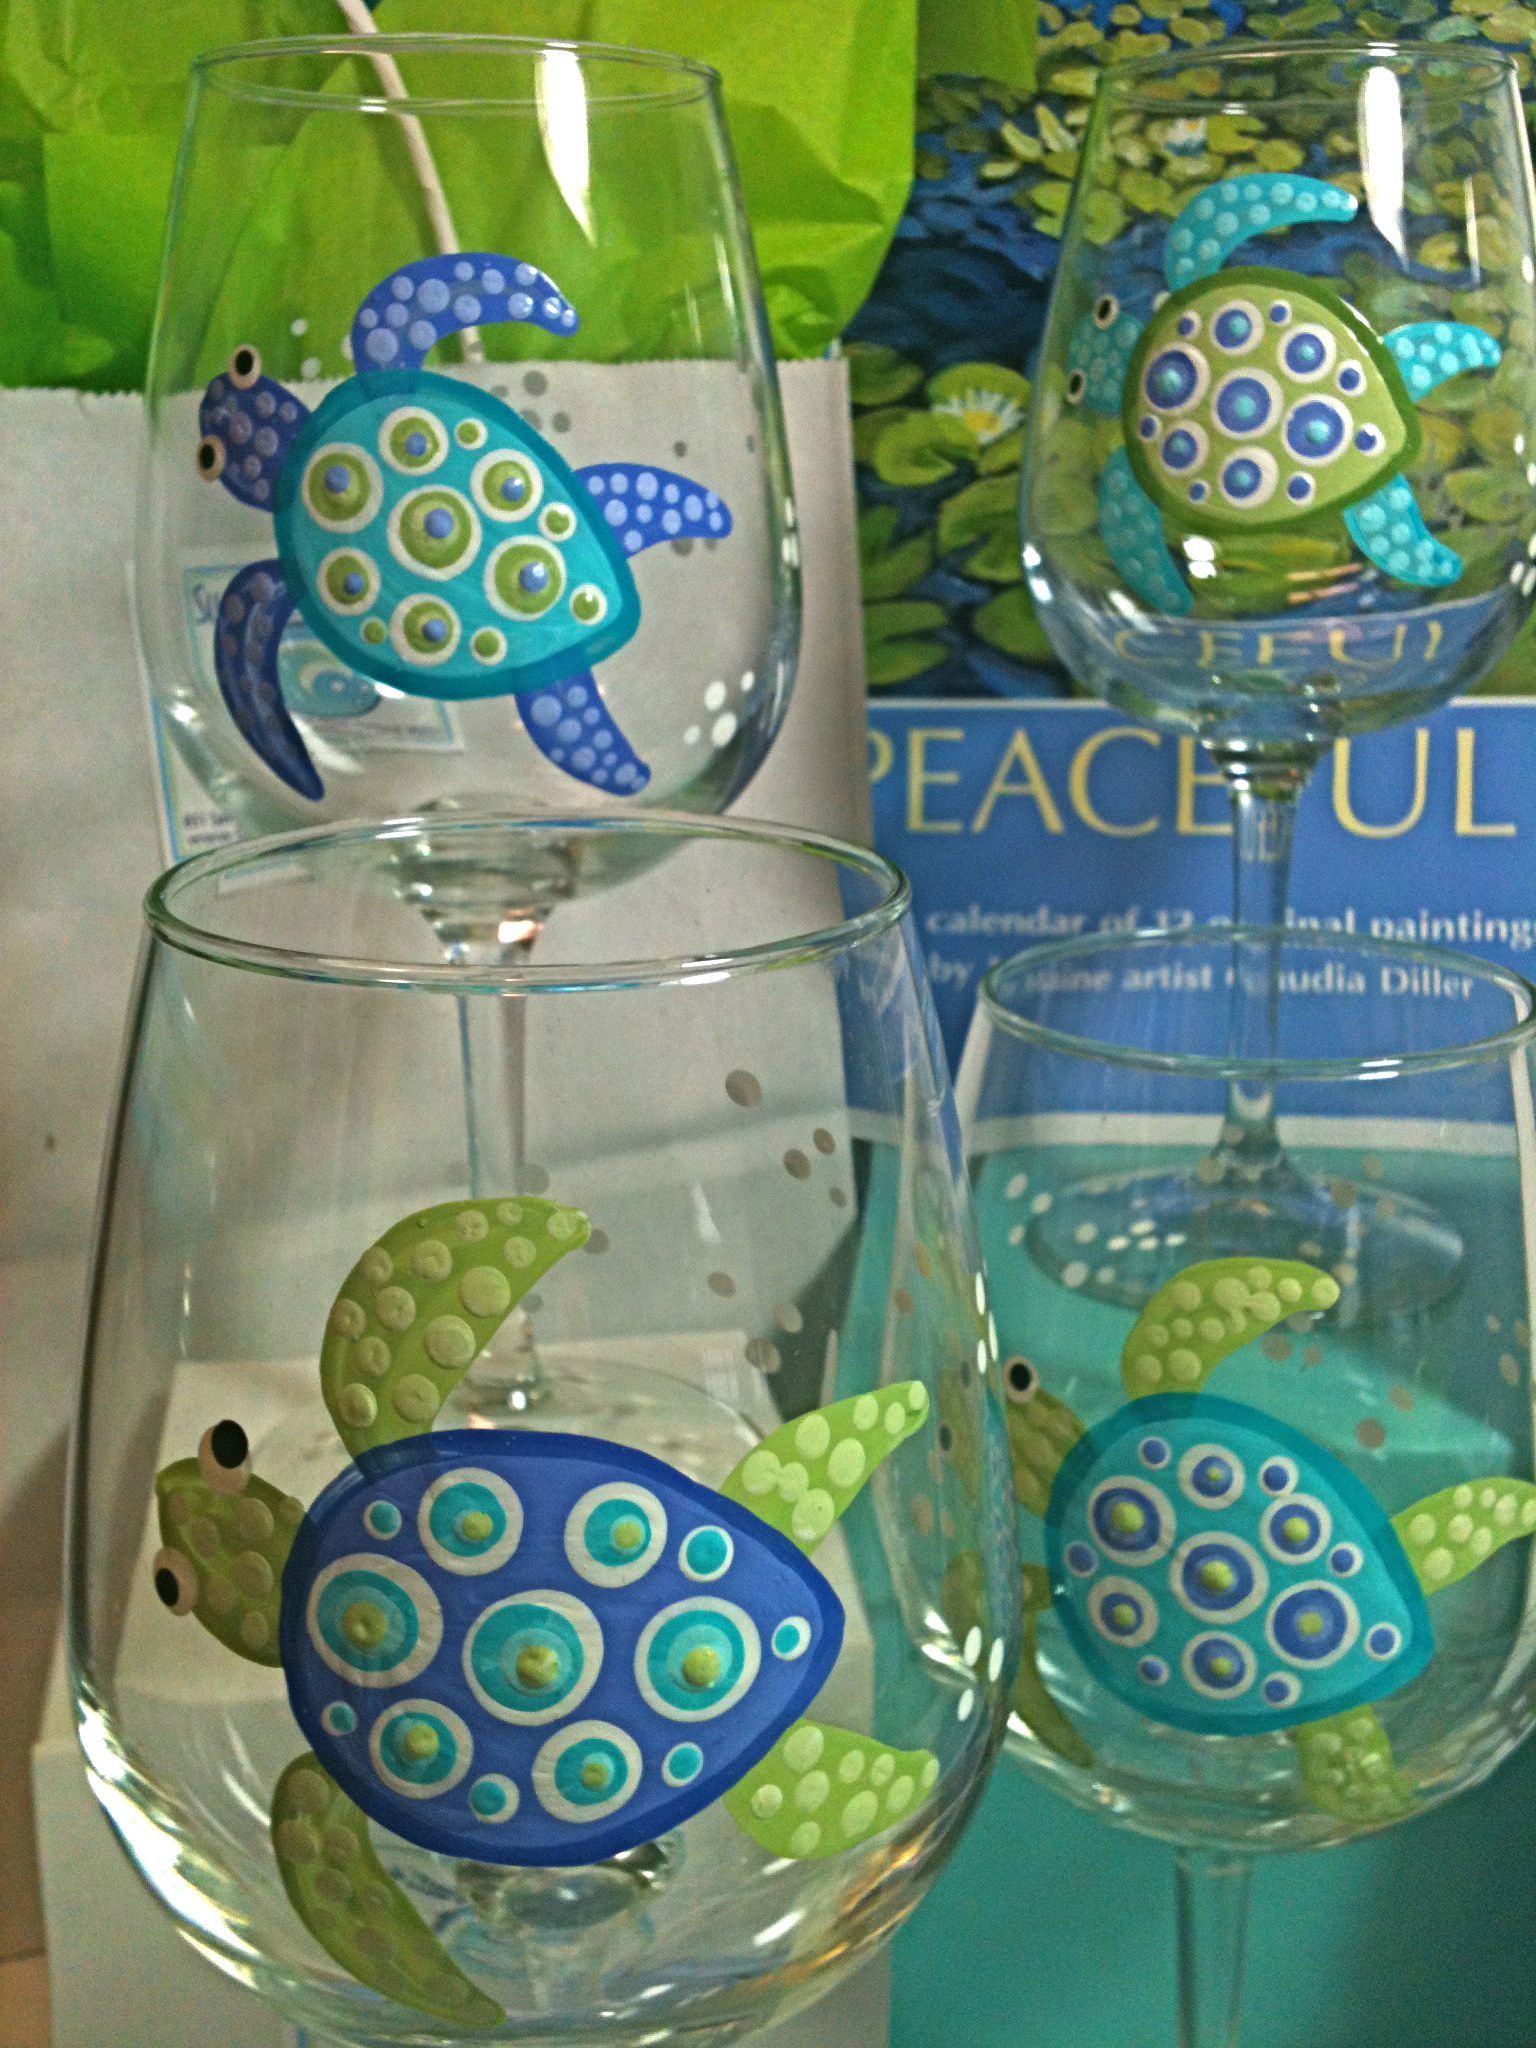 painted glassware...hmm...SEA TURTLES! I know some lovely peeps who would want